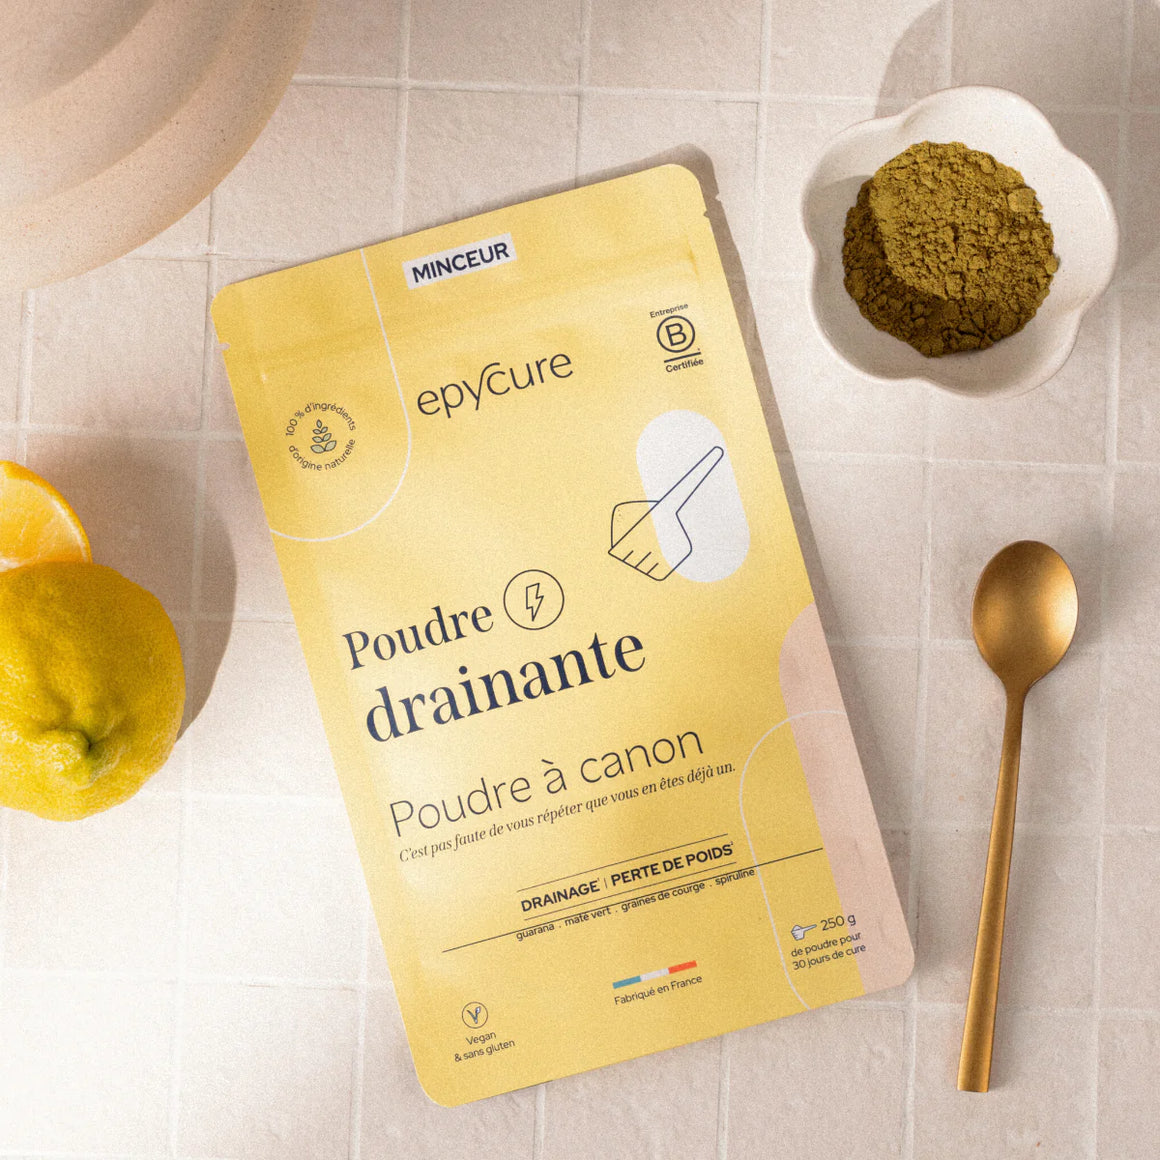 Draining Powder - 1 Month Cure by Epycure